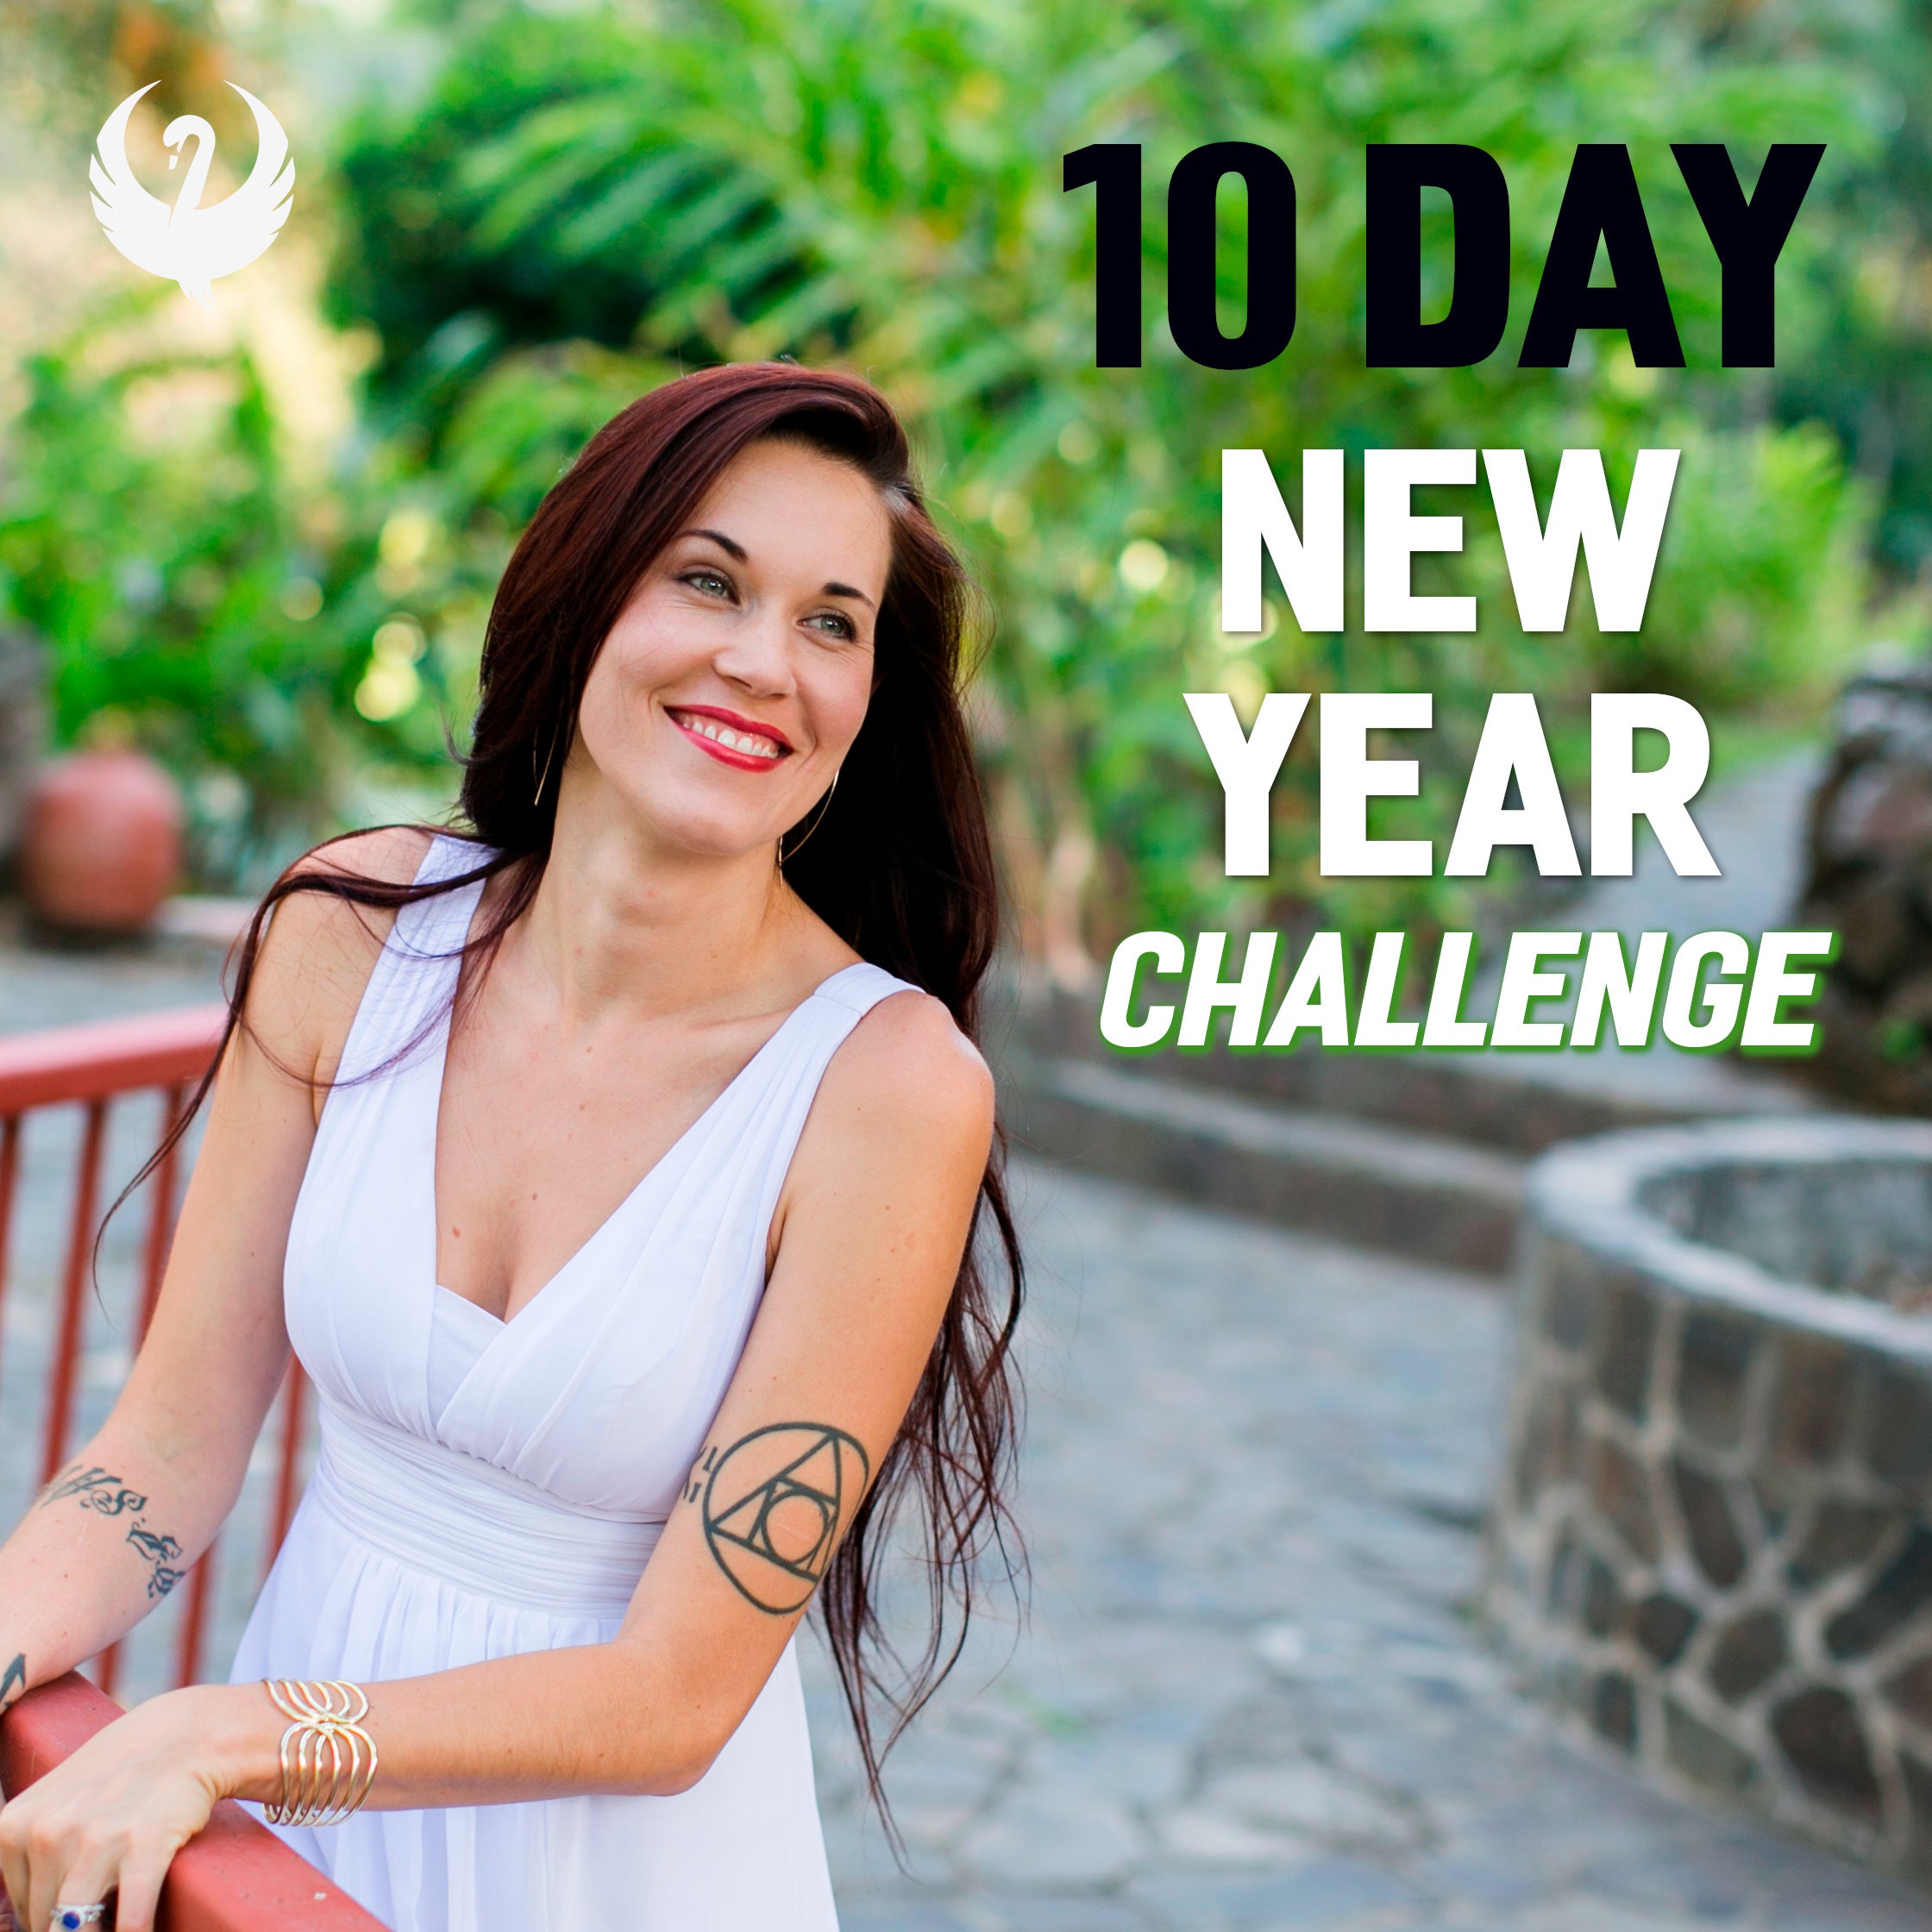 the-one-place-to-find-cheap-10-day-new-year-challenge-hot-on-sale_0.jpg